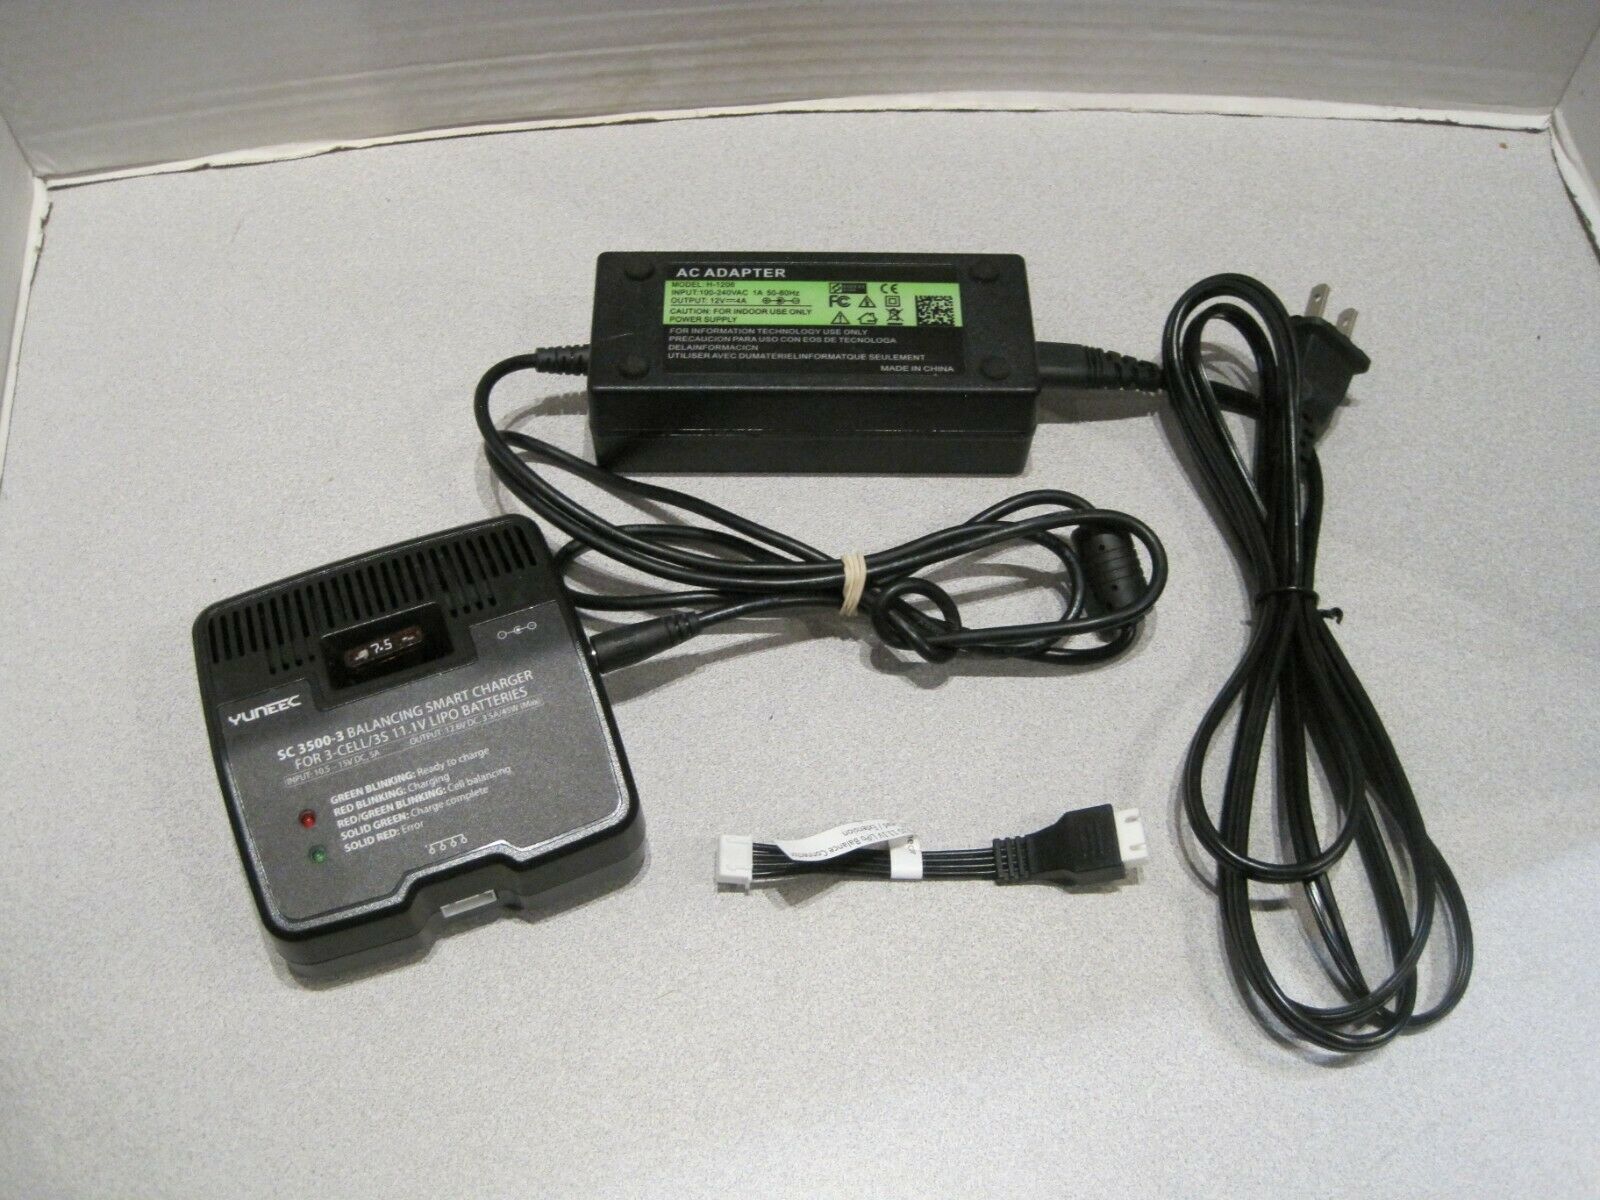 Yuneec Sc 3500-3 Balancing Smart Charger For 3 Cell/3s 11.1v Lipo Batteries